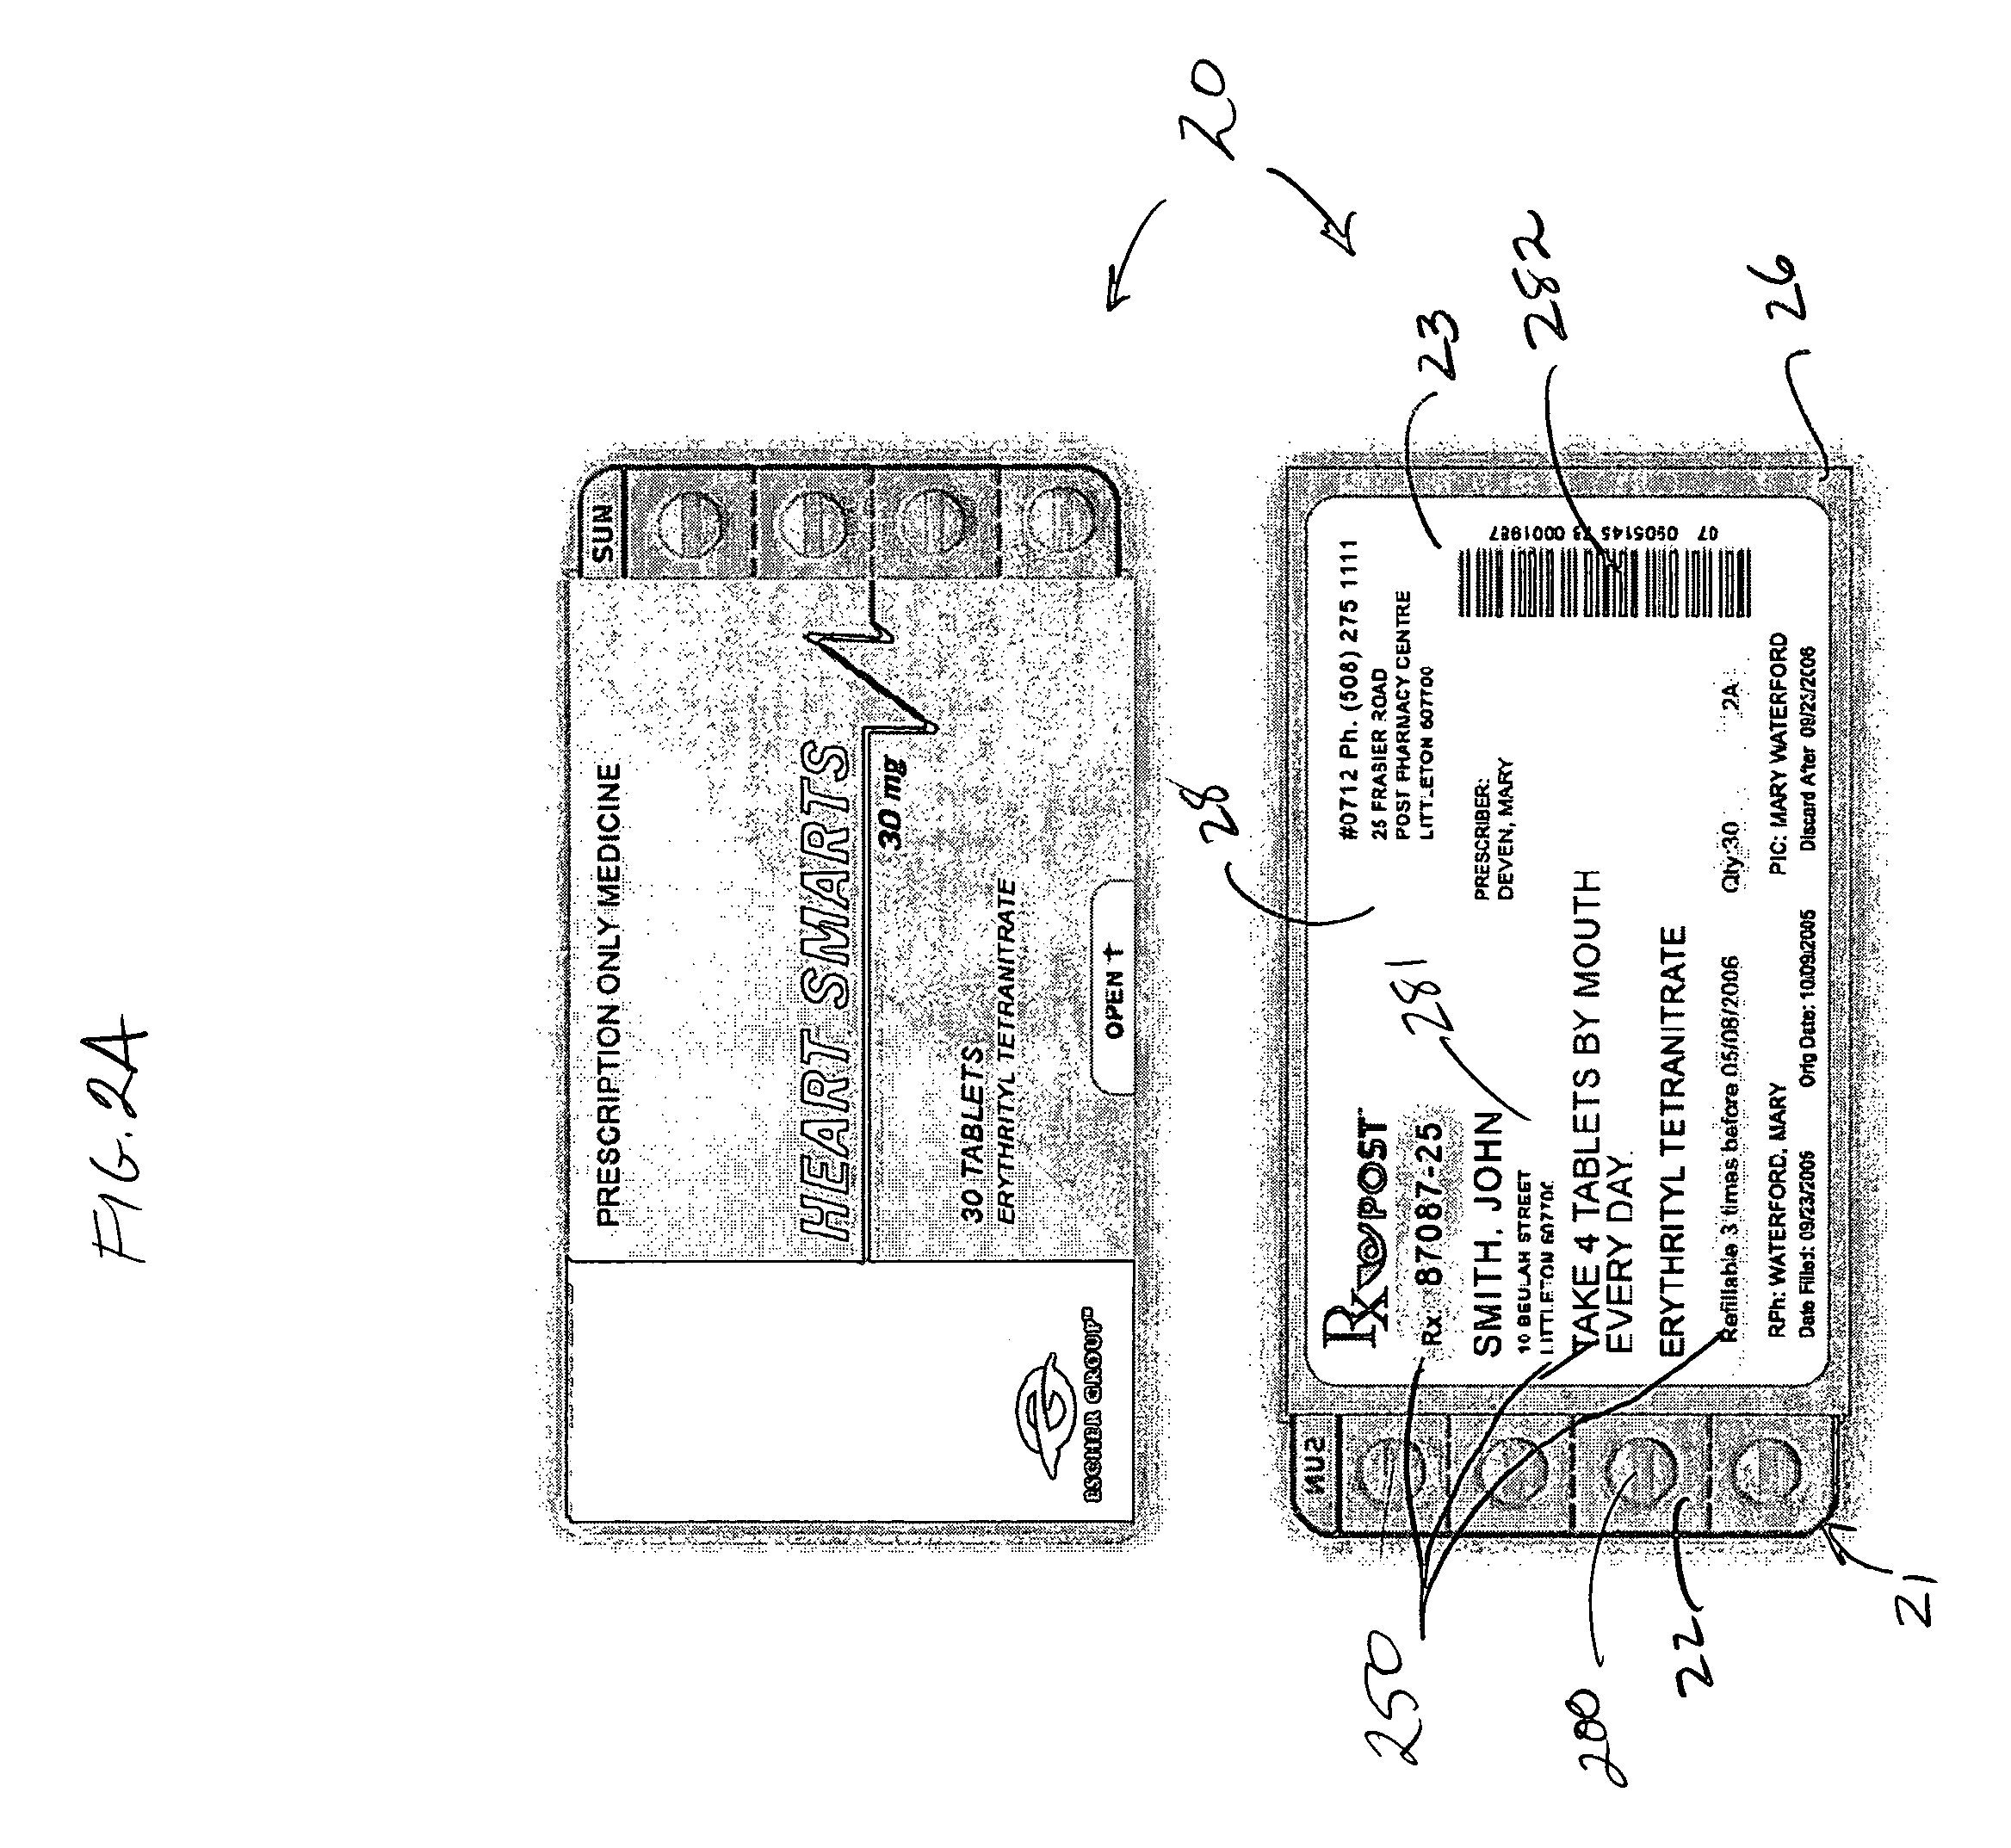 System and method for dispensing, sorting and delivering prescription and non-prescription medications through the post office